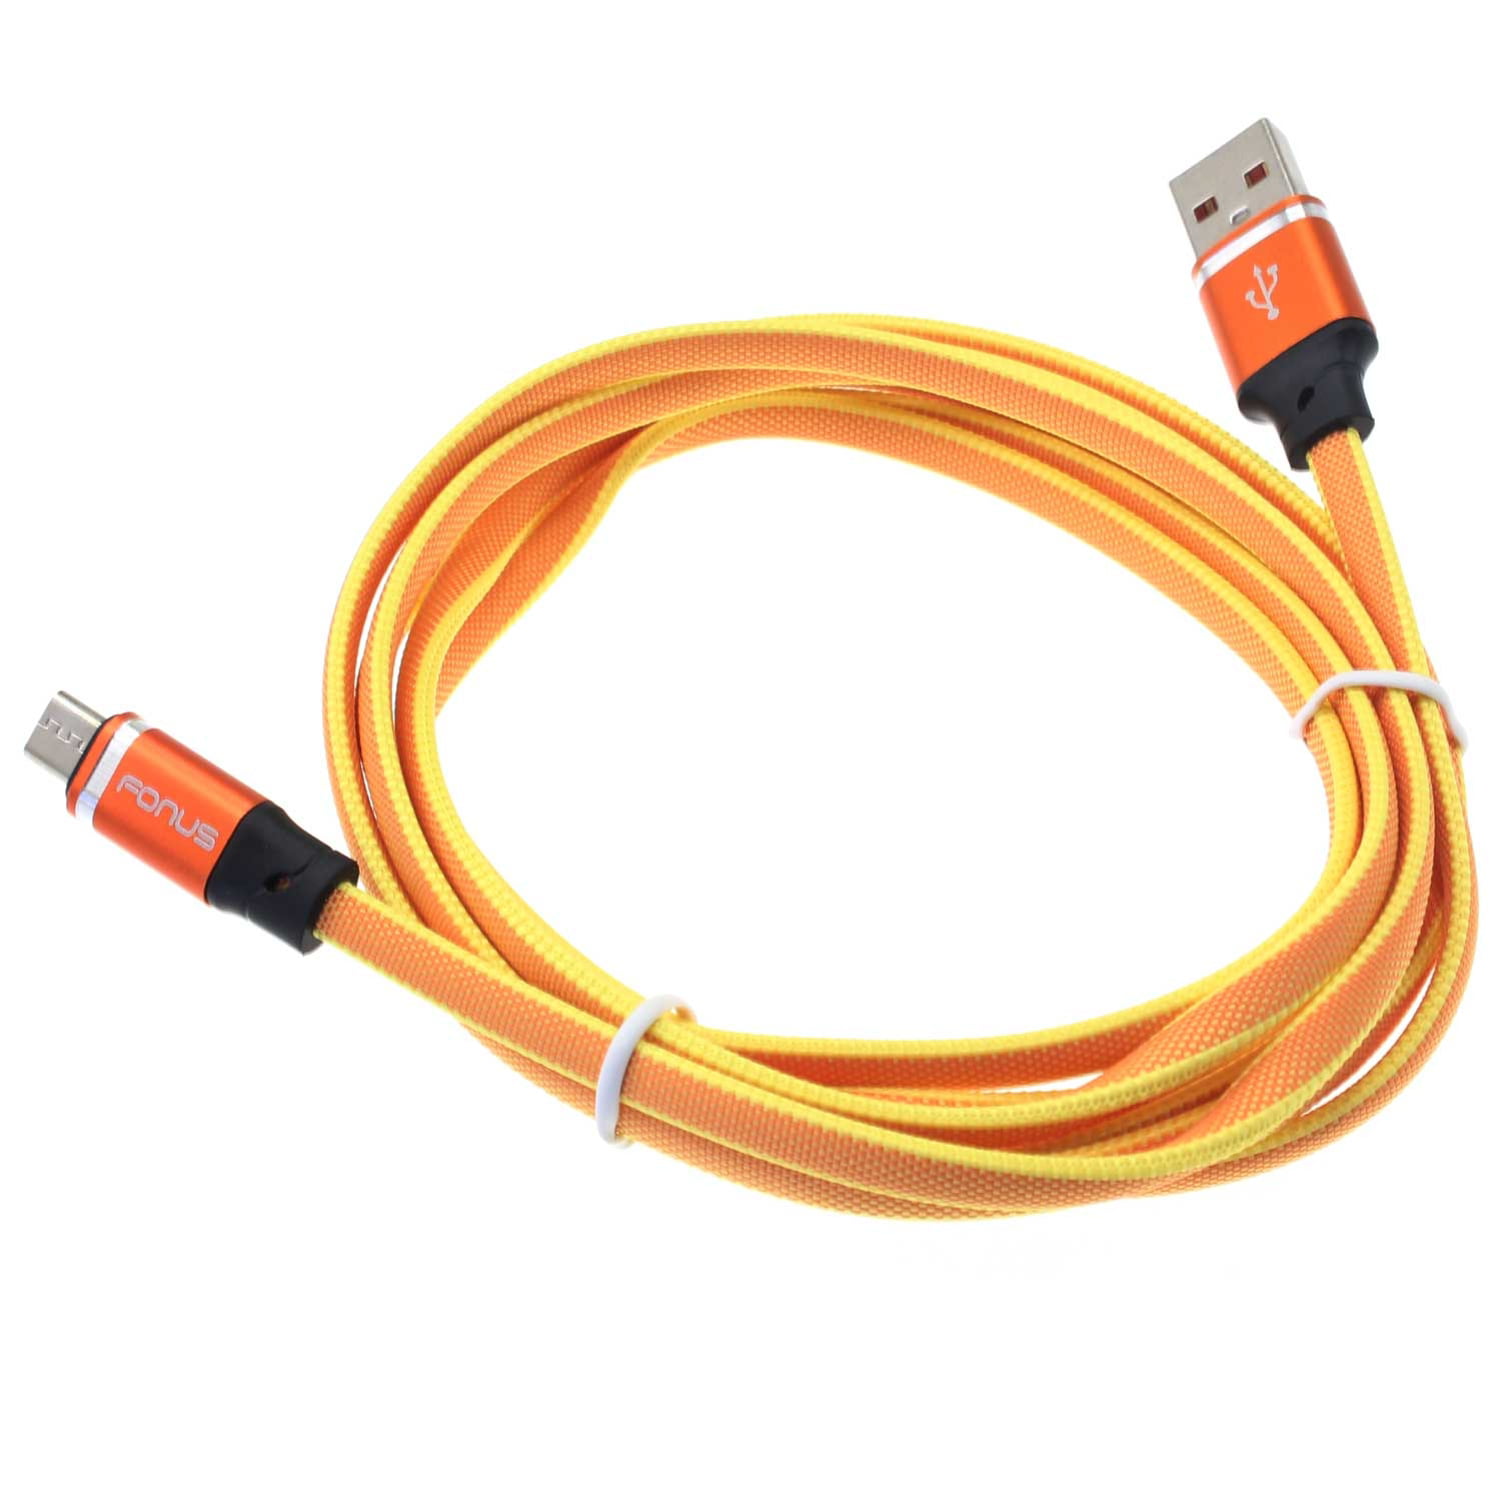 arlo pro 2 ethernet cable